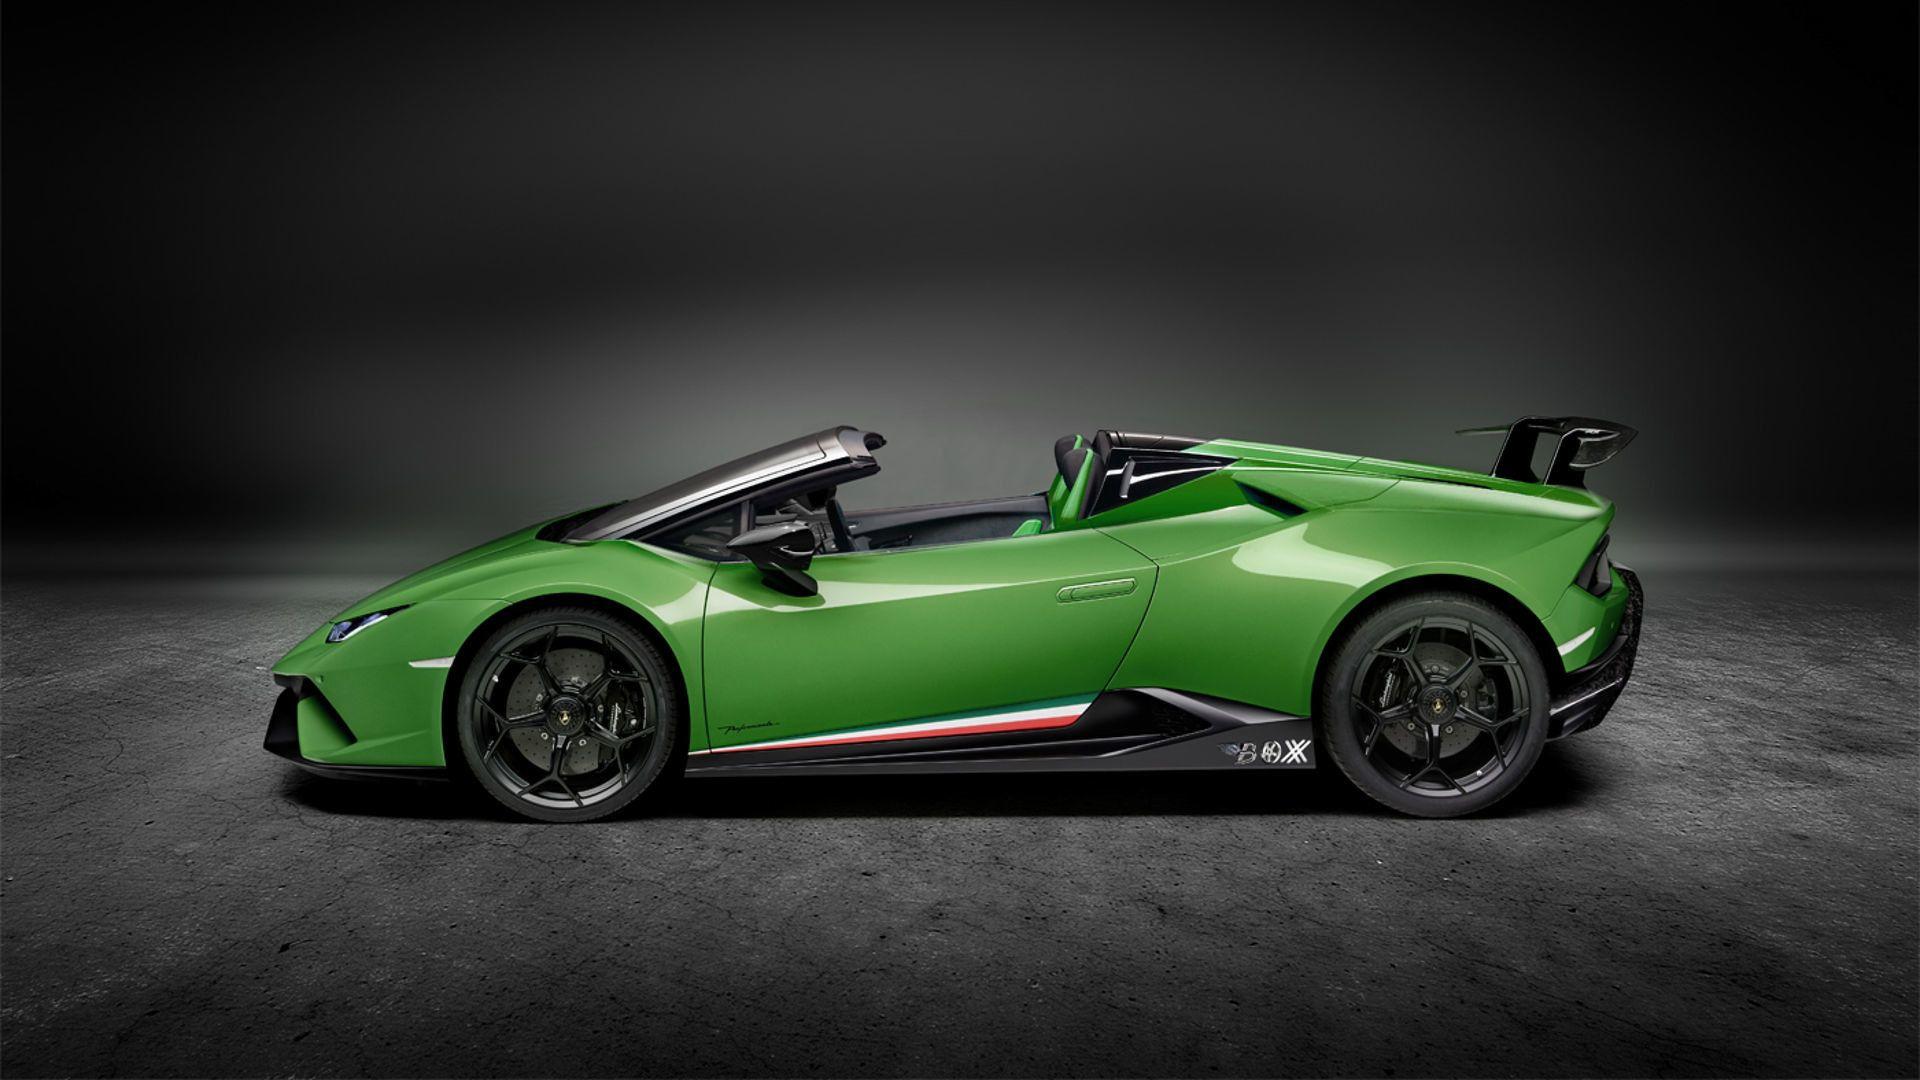 Lambo Huracan Performante Spyder Render Eases The Anticipation